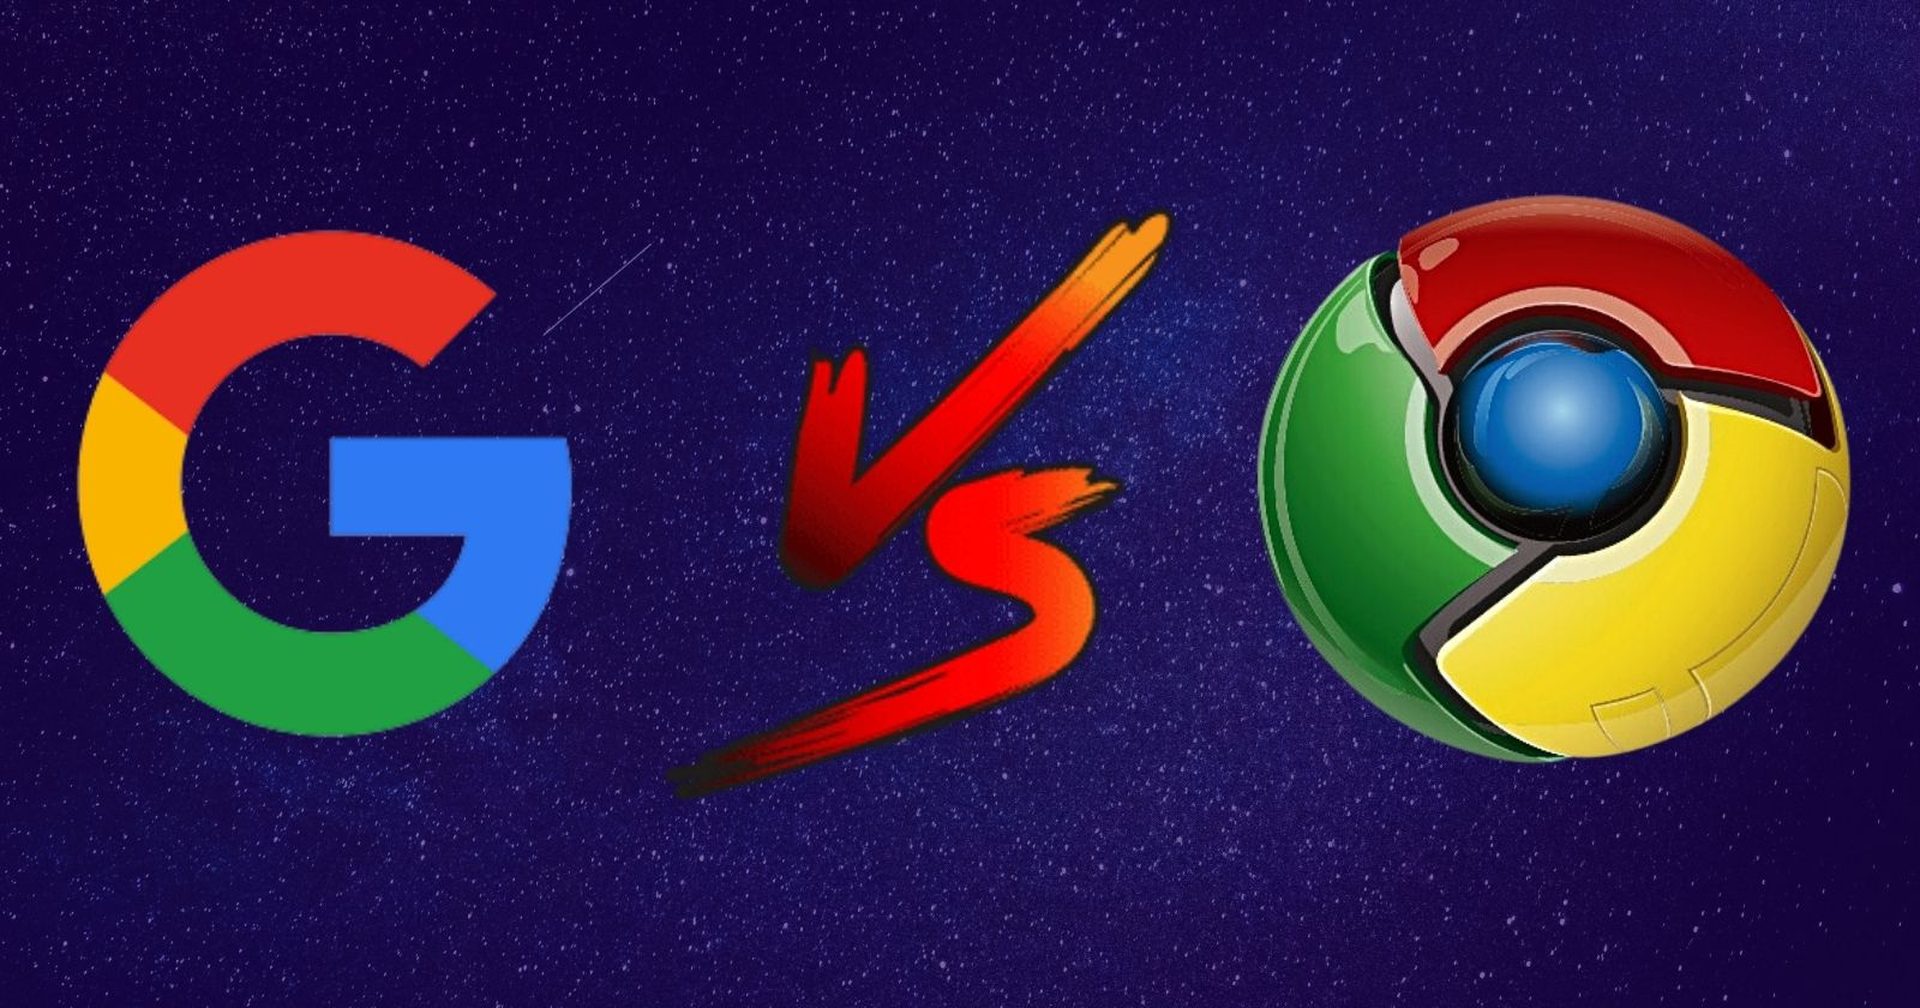 Google App vs Chrome: What are the differences?